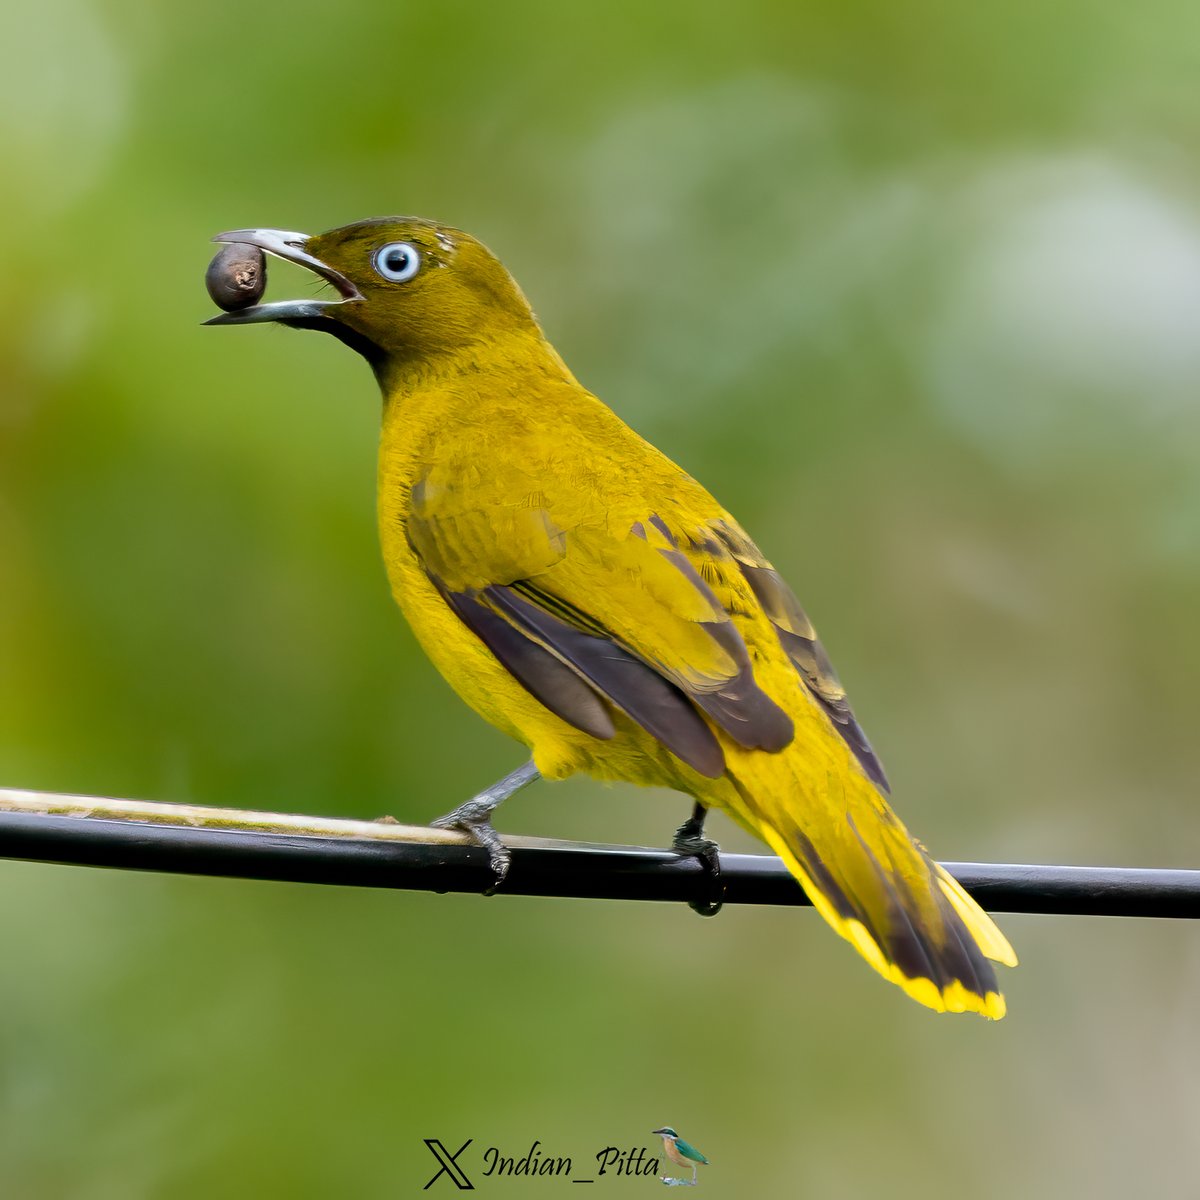 Sunday's thread is about Yellow Coloured Tones. I start with Andaman Bulbul from Andaman Islands. Isn't this is one of beautiful bulbul ?